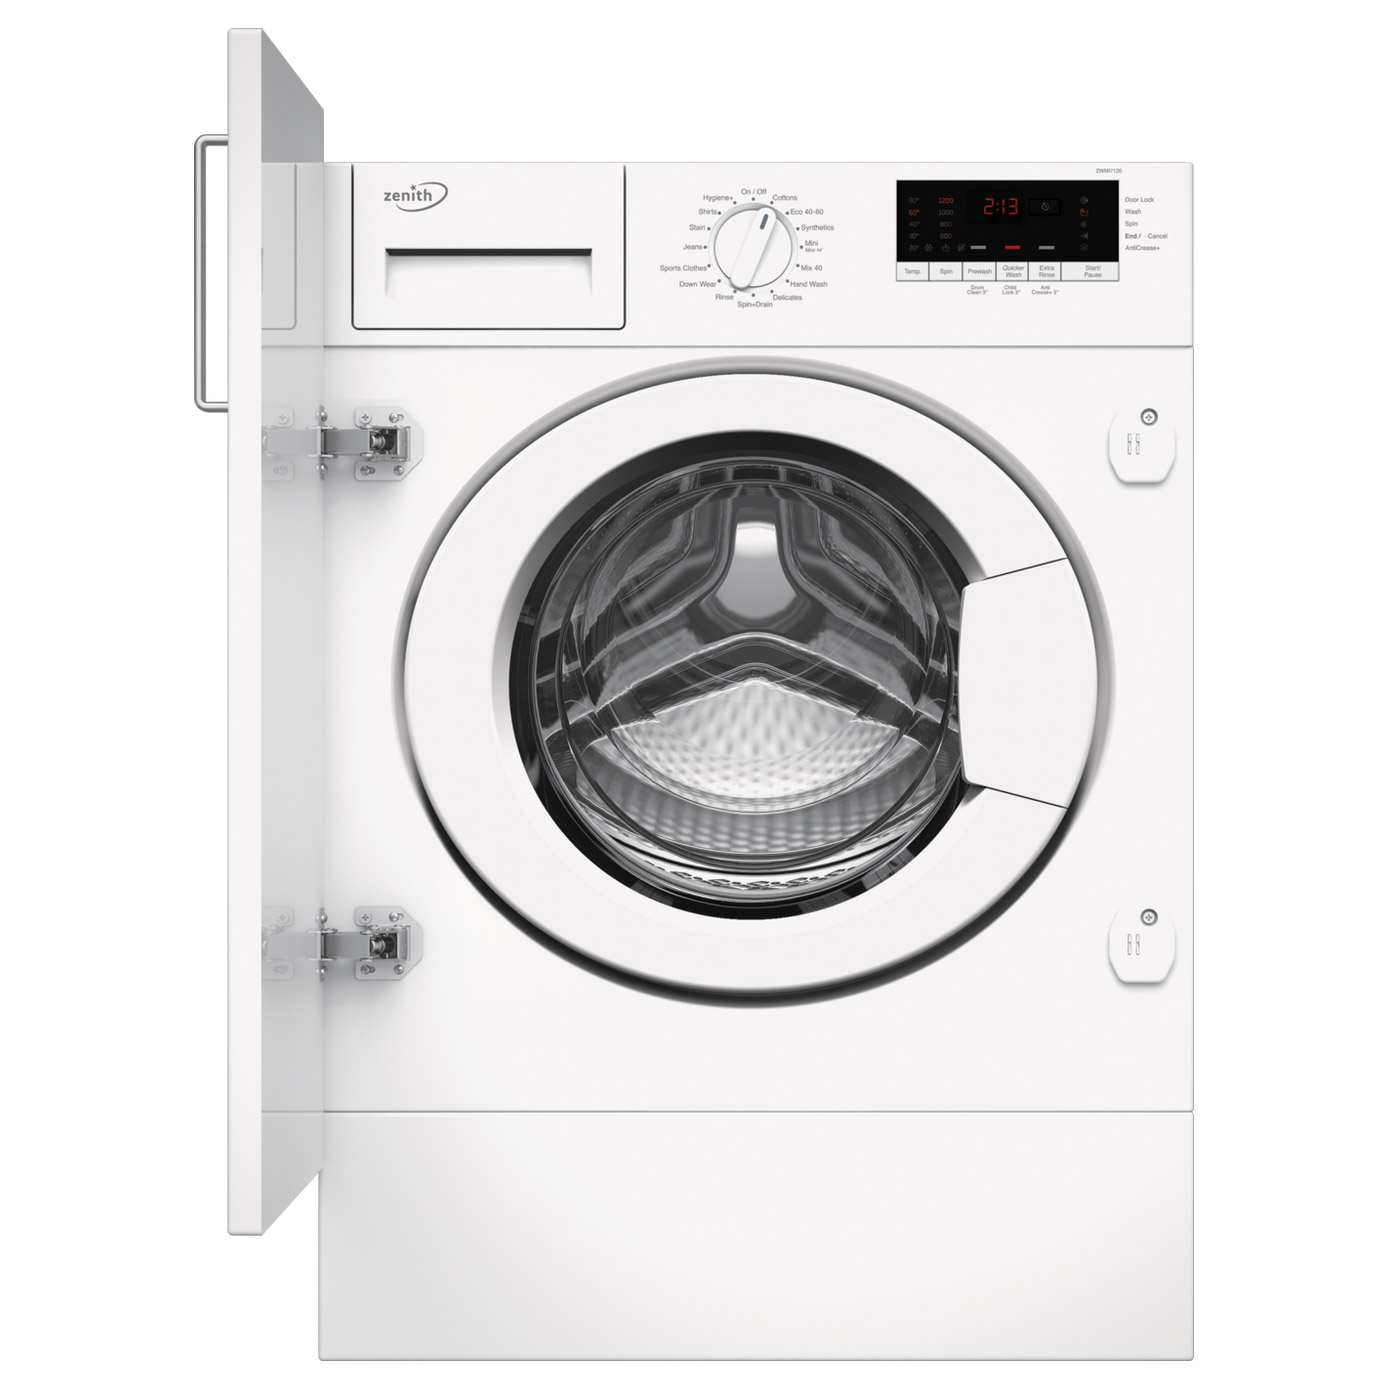 Zenith ZWMI7120 Integrated Washing Machine 1200rpm 7Kg C Rated